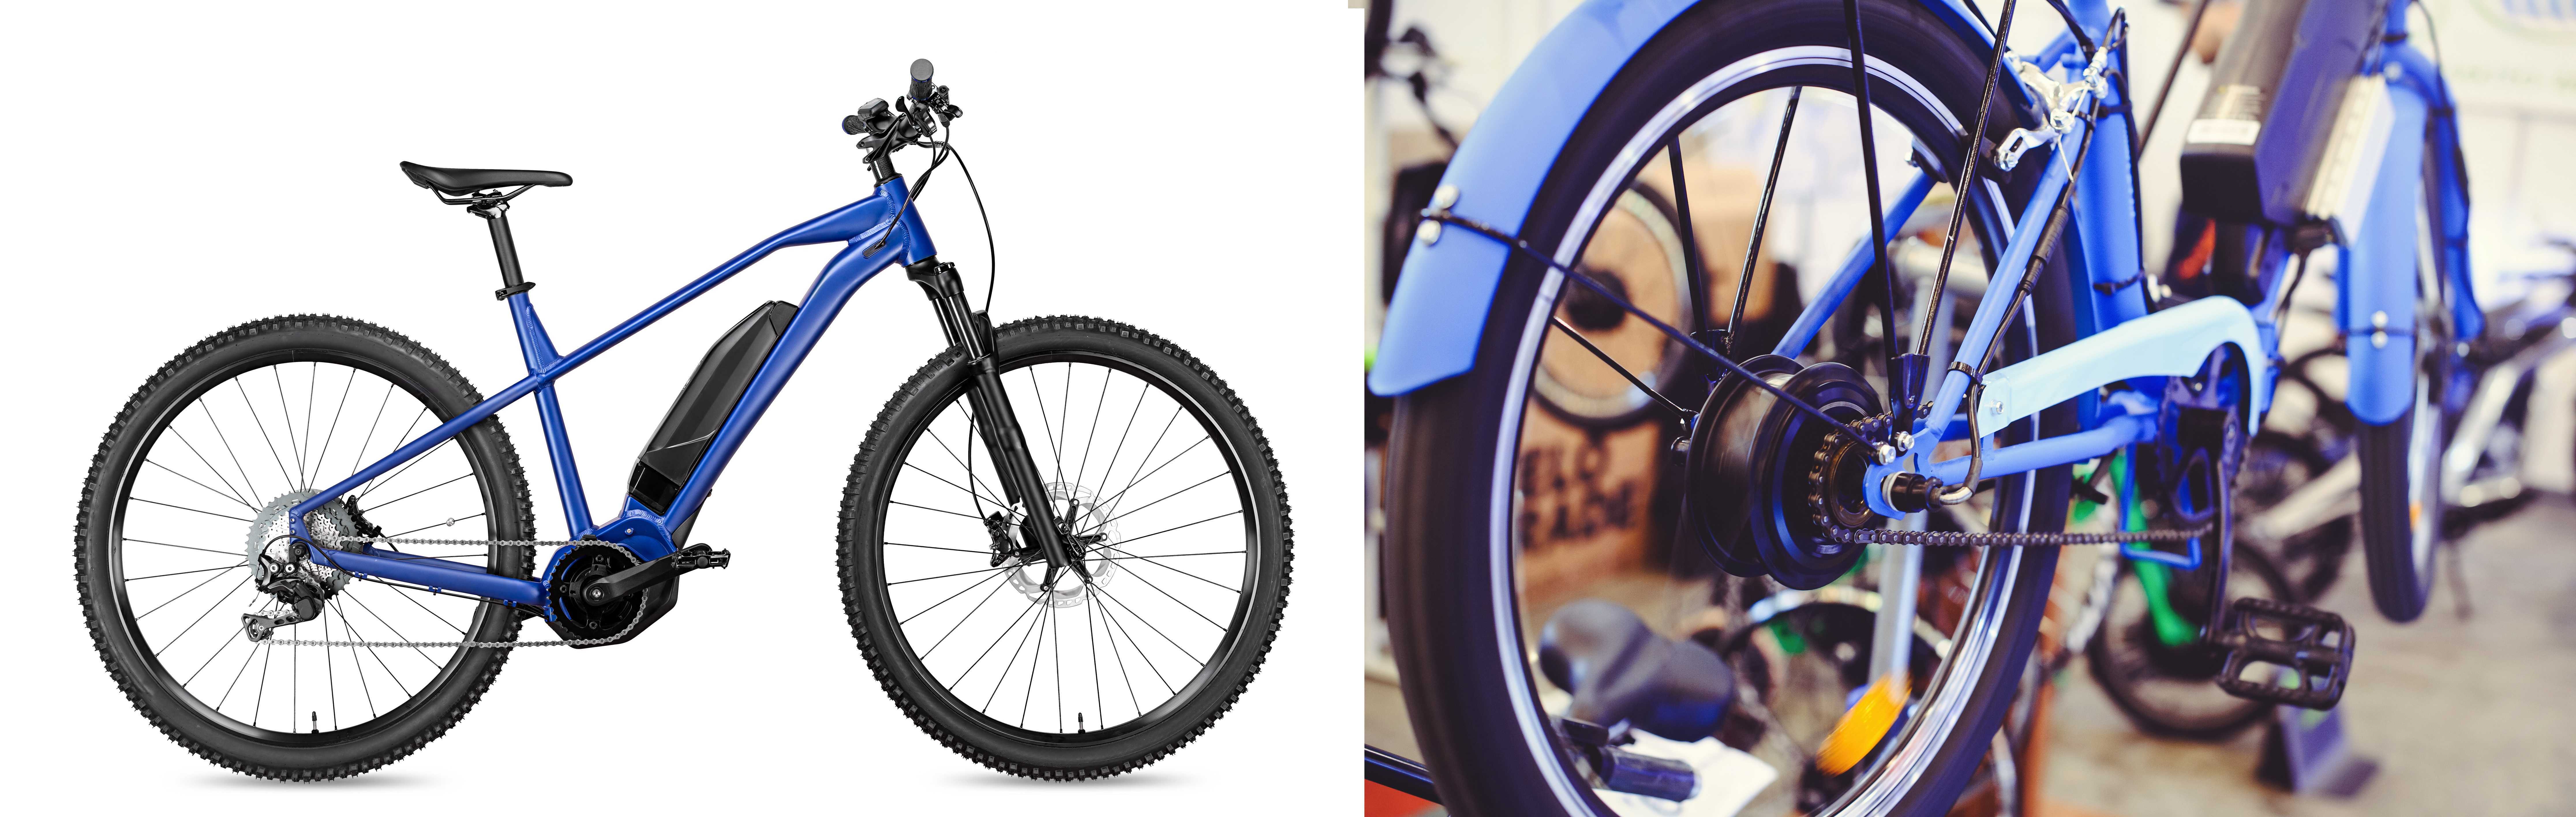 Figure 2: Mid-drive motor at center of bicycle (left); hub motor in rear wheel of bicycle (right)